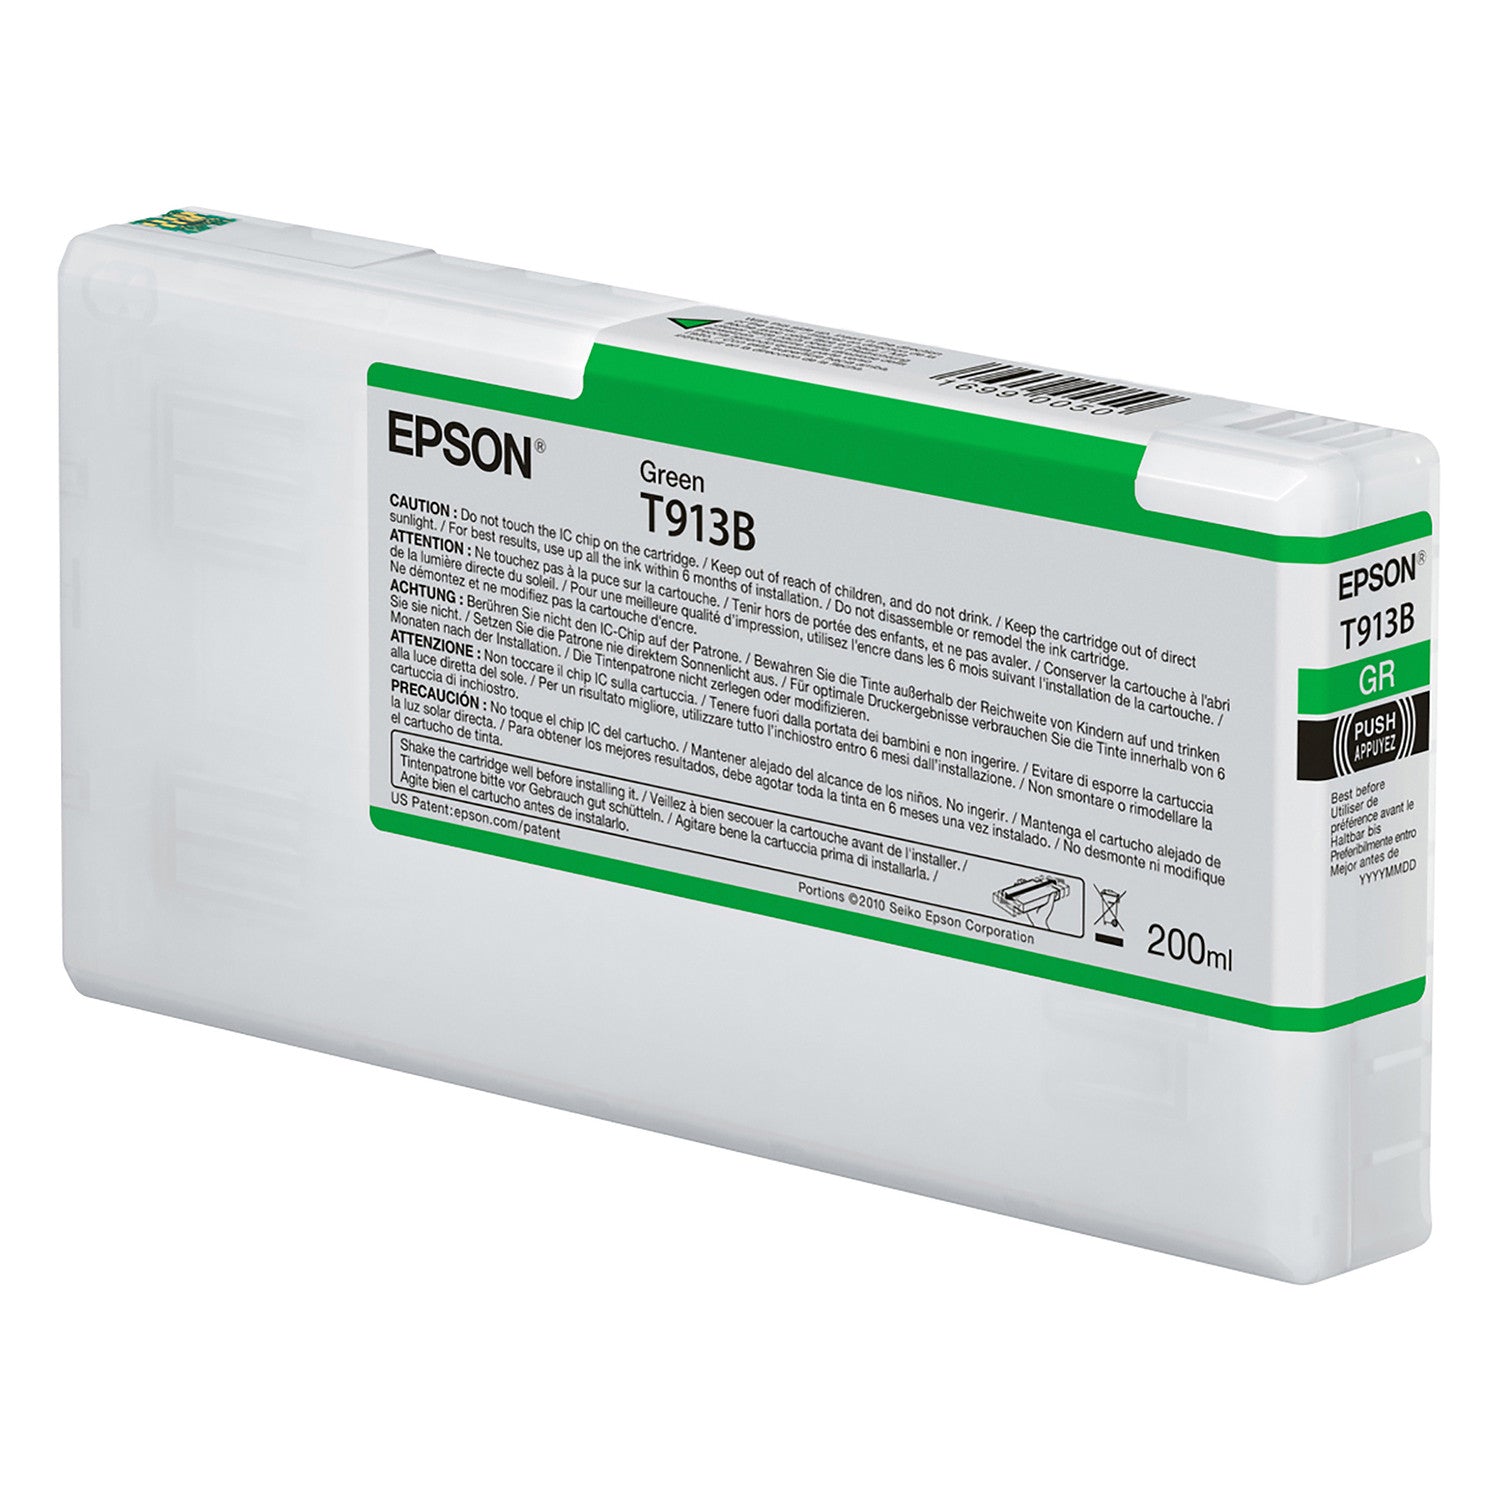 Epson T913B00 P5000 Ultrachrome HD Ink 200ml Green, papers printer ink, Epson - Pictureline 